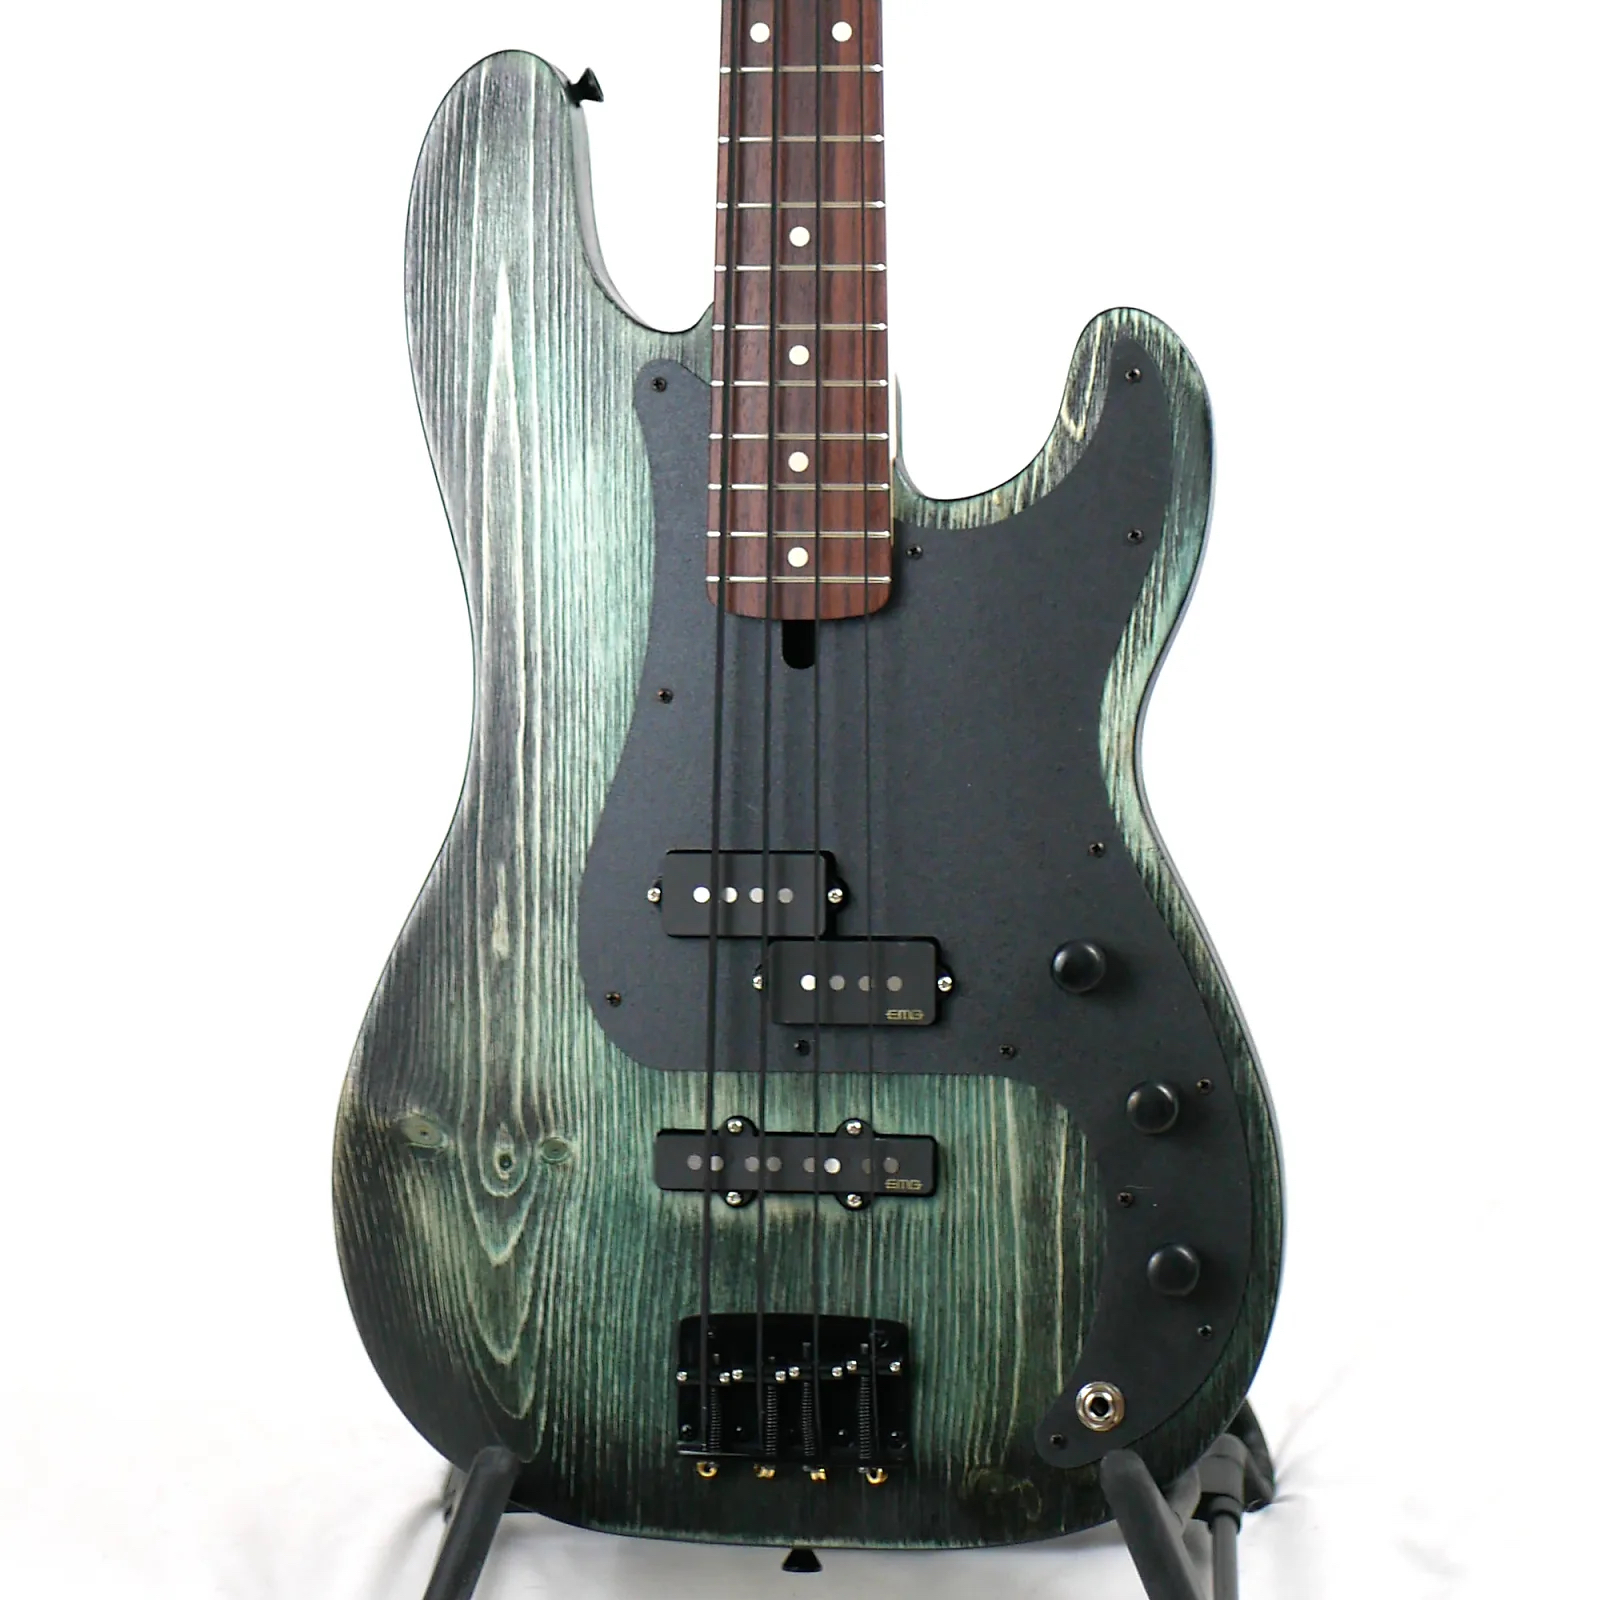 Image is of the front of Pamela PJ 34" Long-Scale Bass in Teal Glow on Distressed Pine with EMG Geezer Butler PJ Pickups